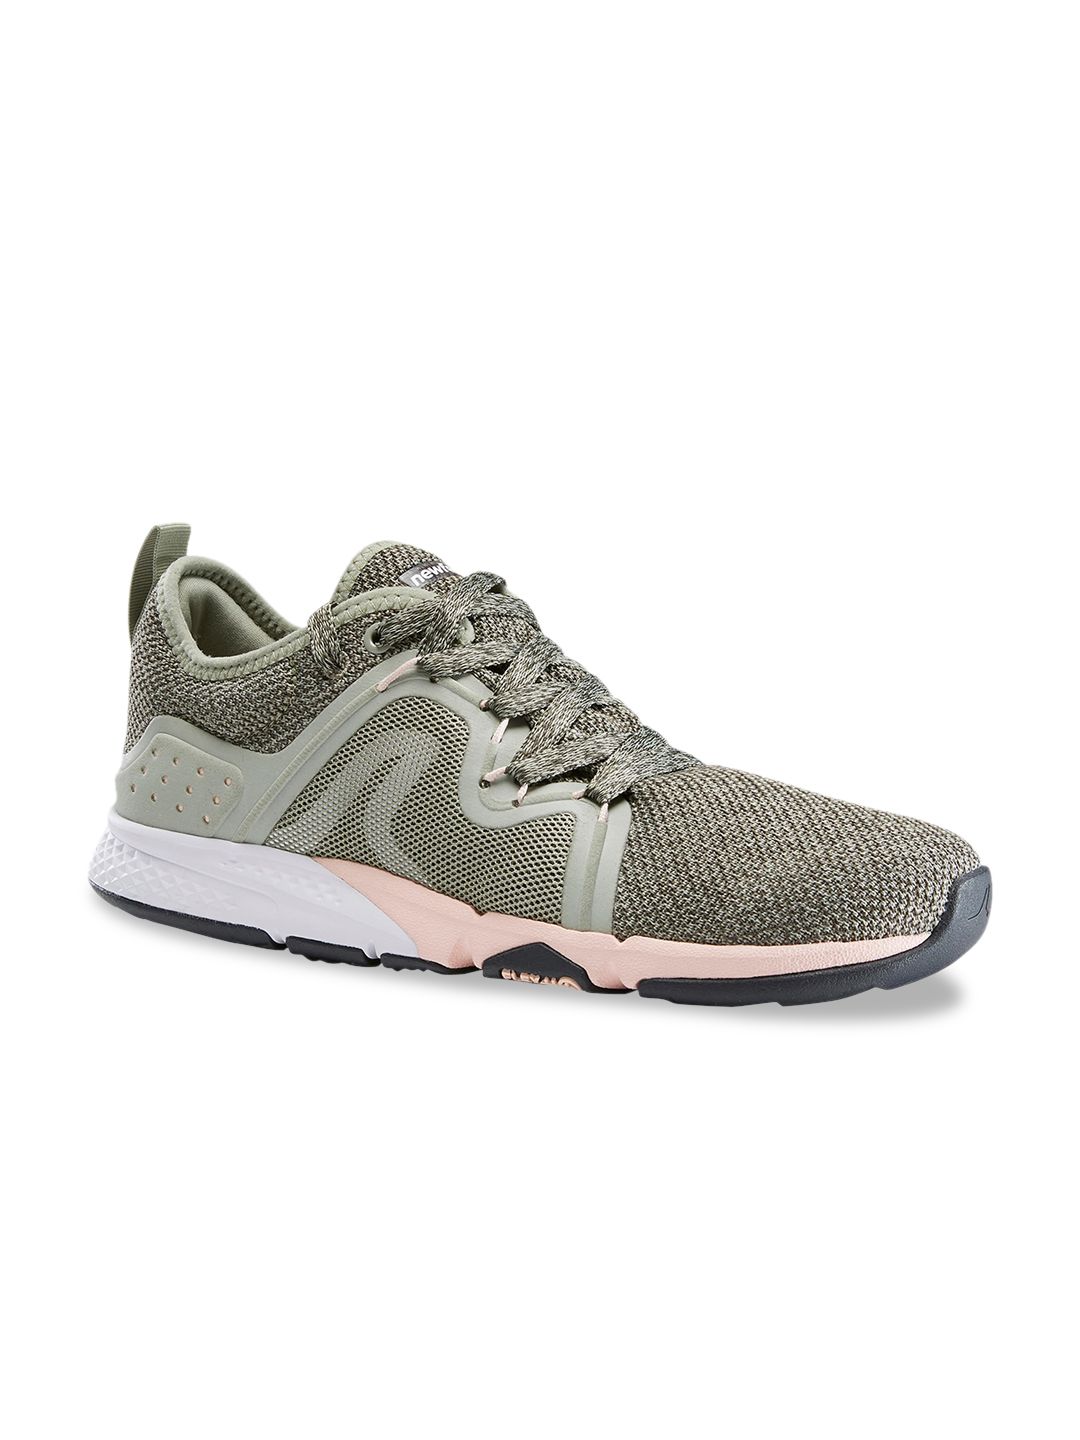 Newfeel By Decathlon Women Grey Synthetic Walking Shoes Price in India